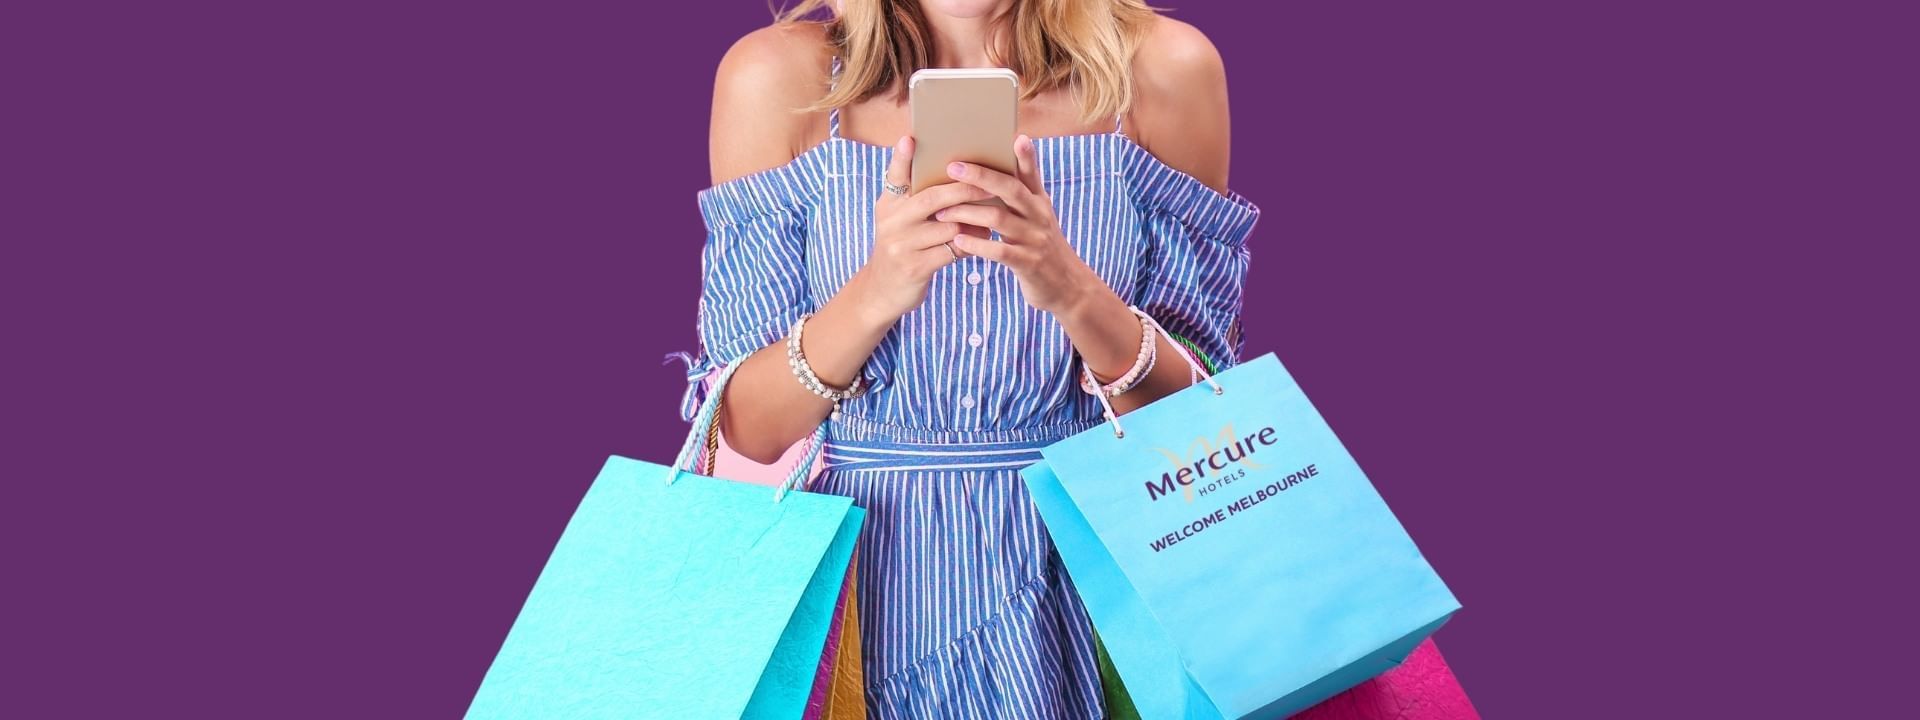 Mercure_shopping_accommodation_package